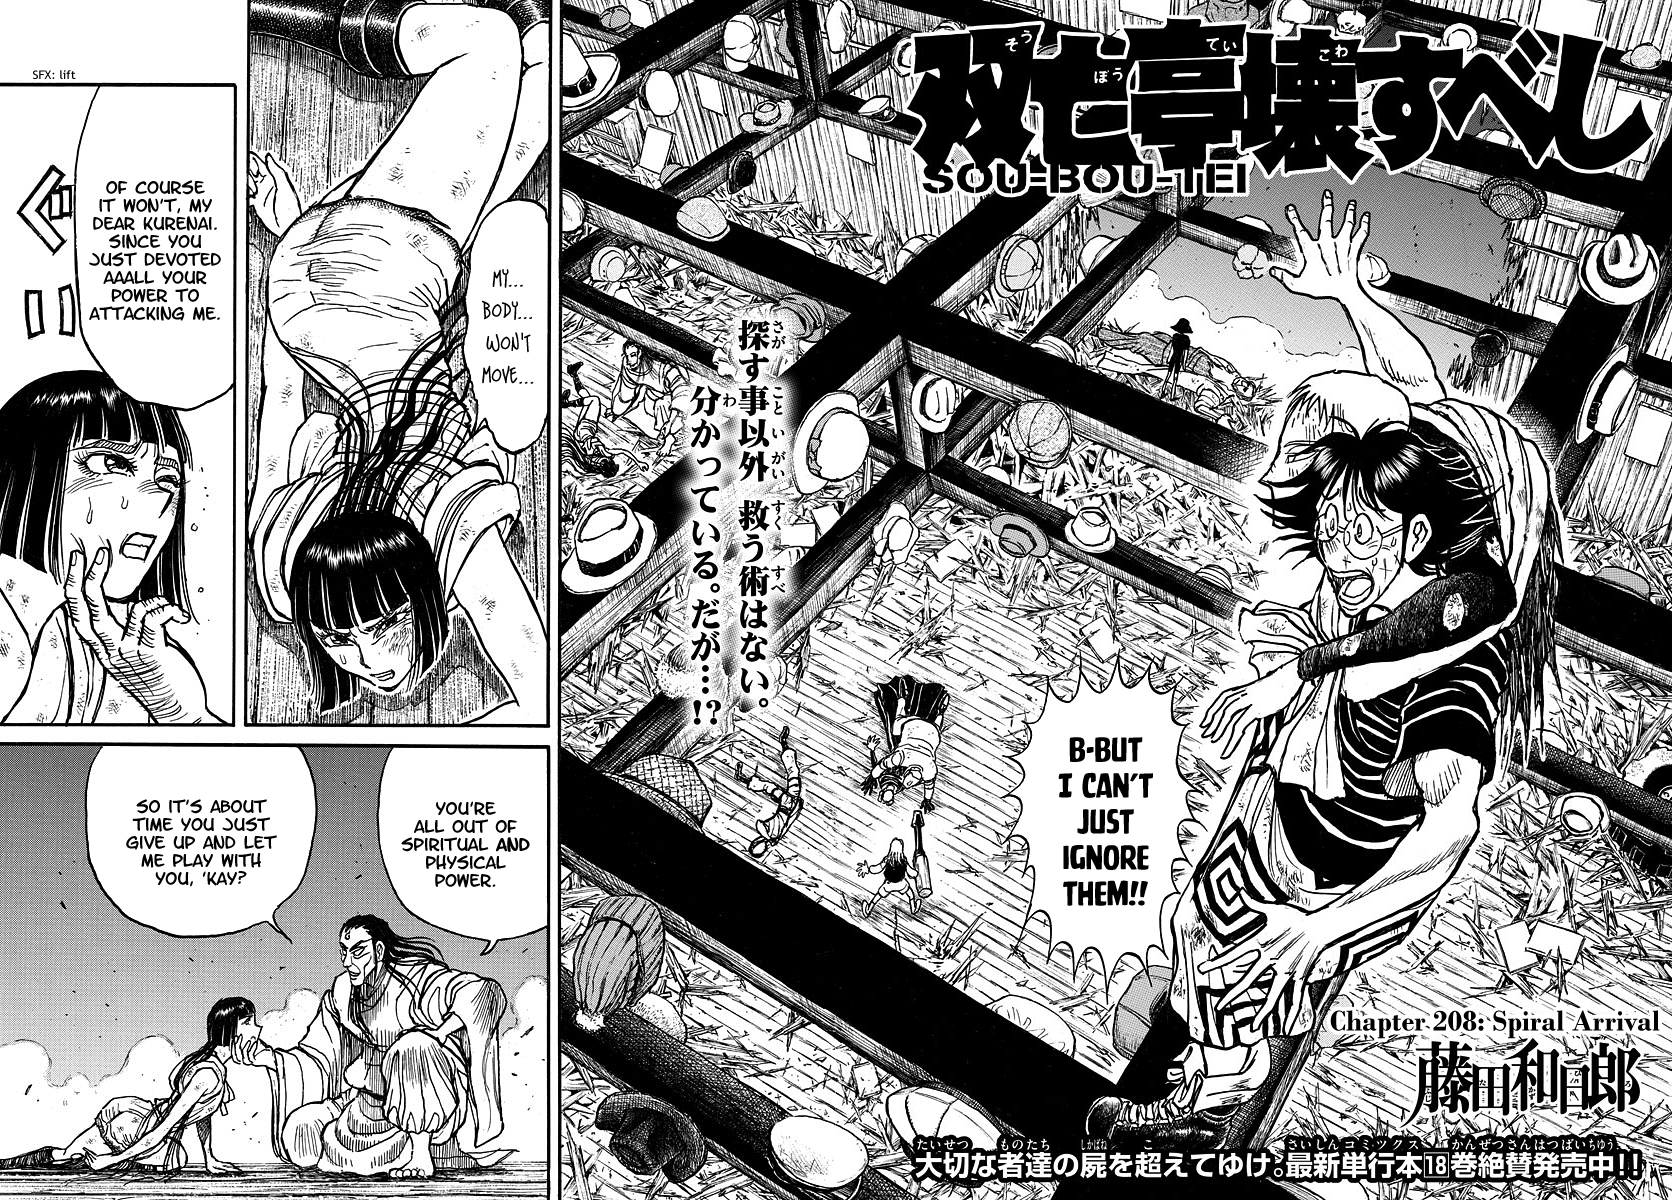 Souboutei Must Be Destroyed Vol.21 Chapter 208: Spiral Arrival - Picture 2